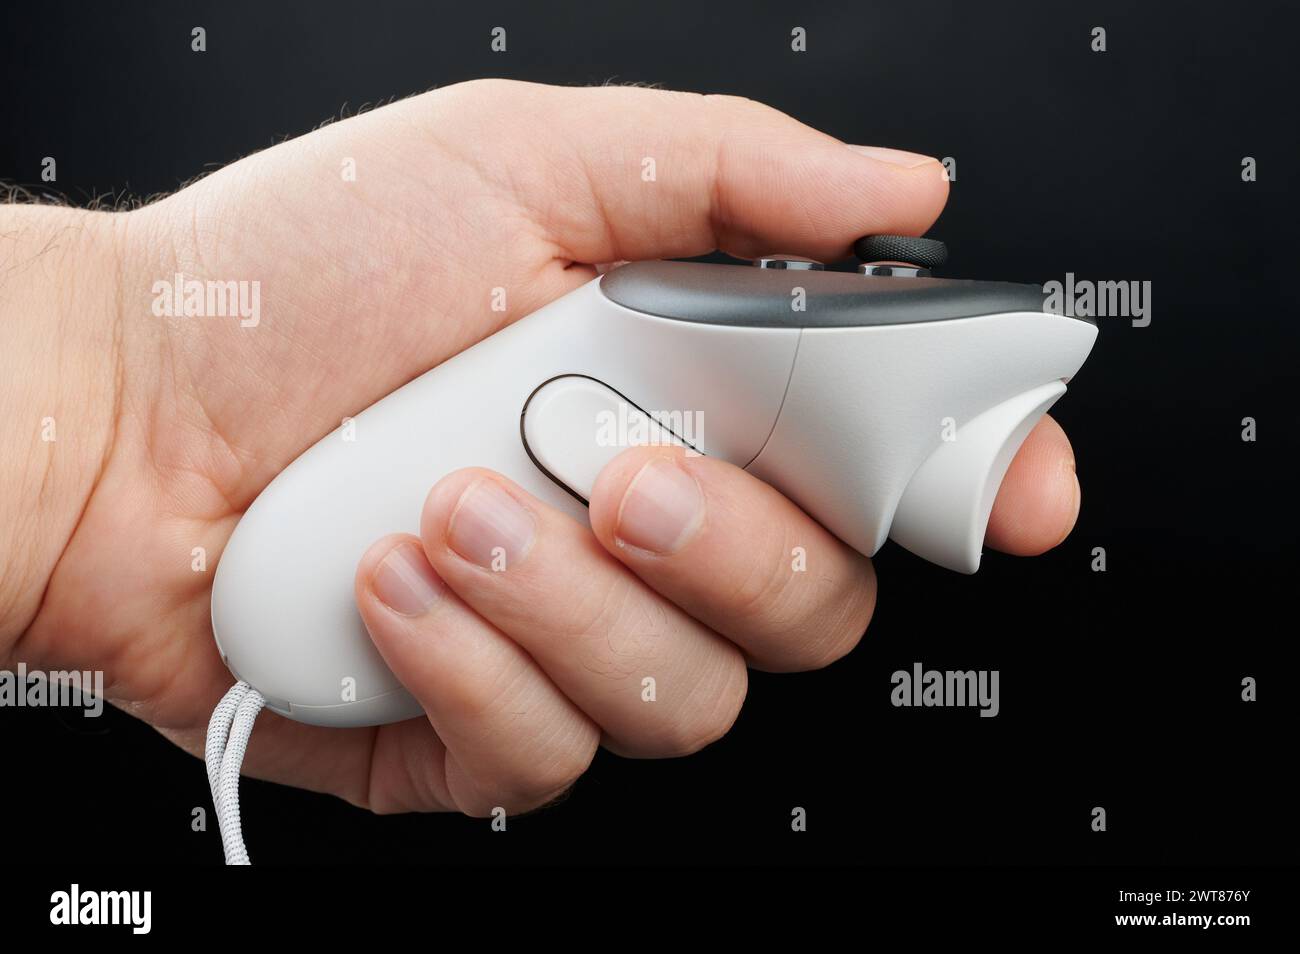 Hand hold VR joystick side view isolated on black studio background Stock Photo